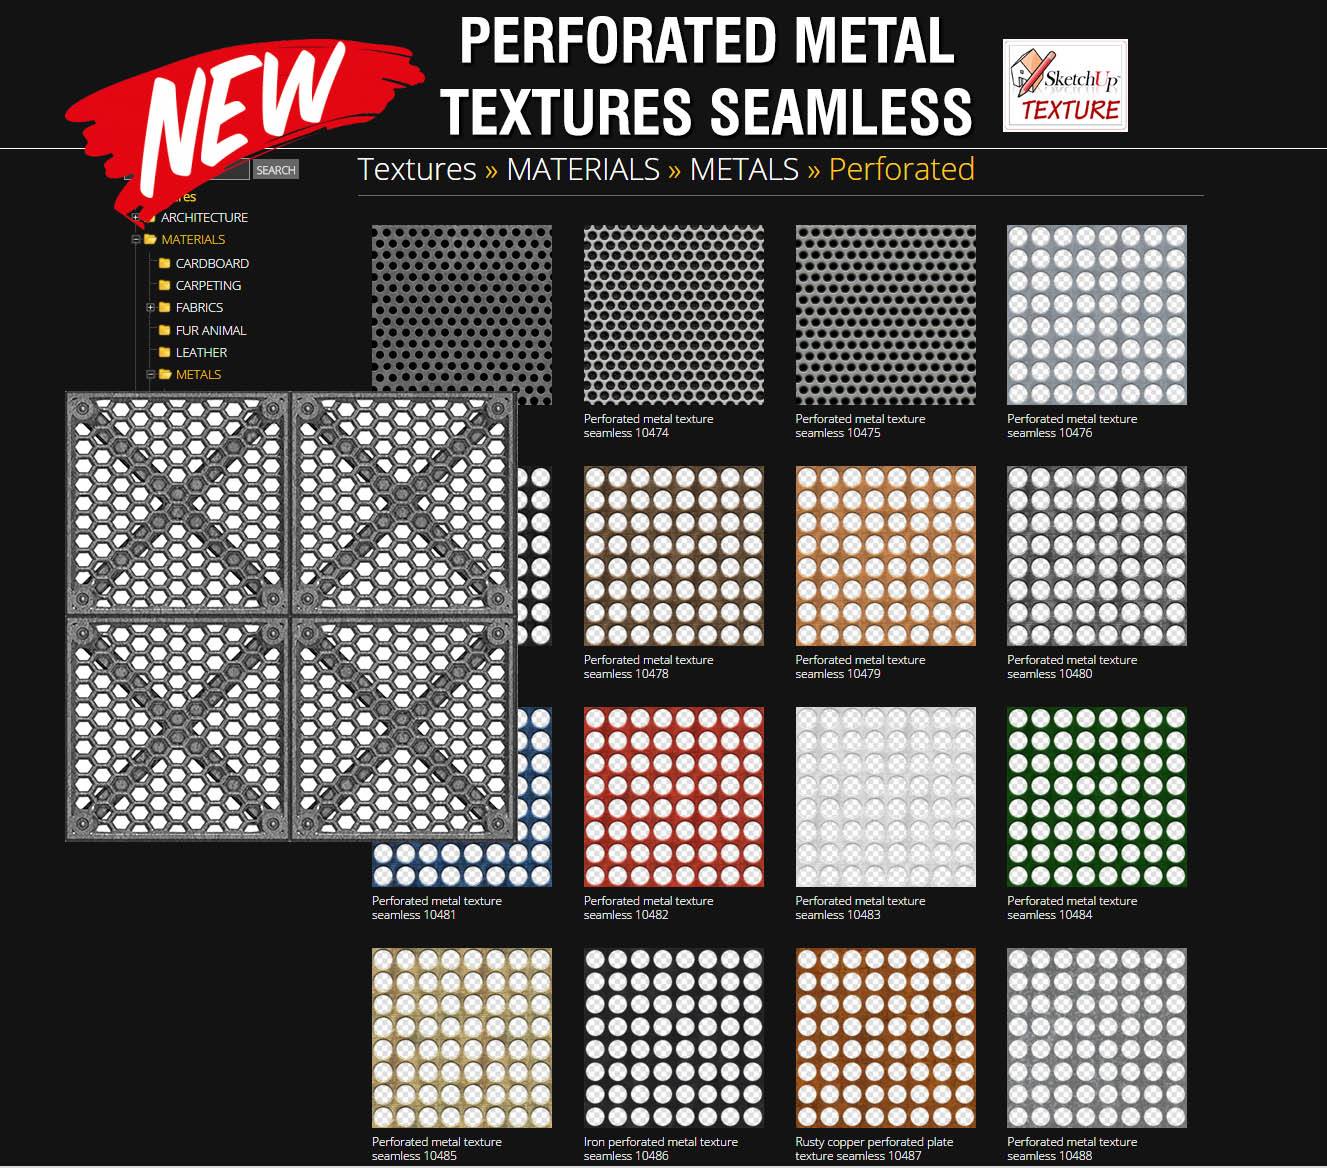 Sketchup Texture New Free Perforated Metals Textures